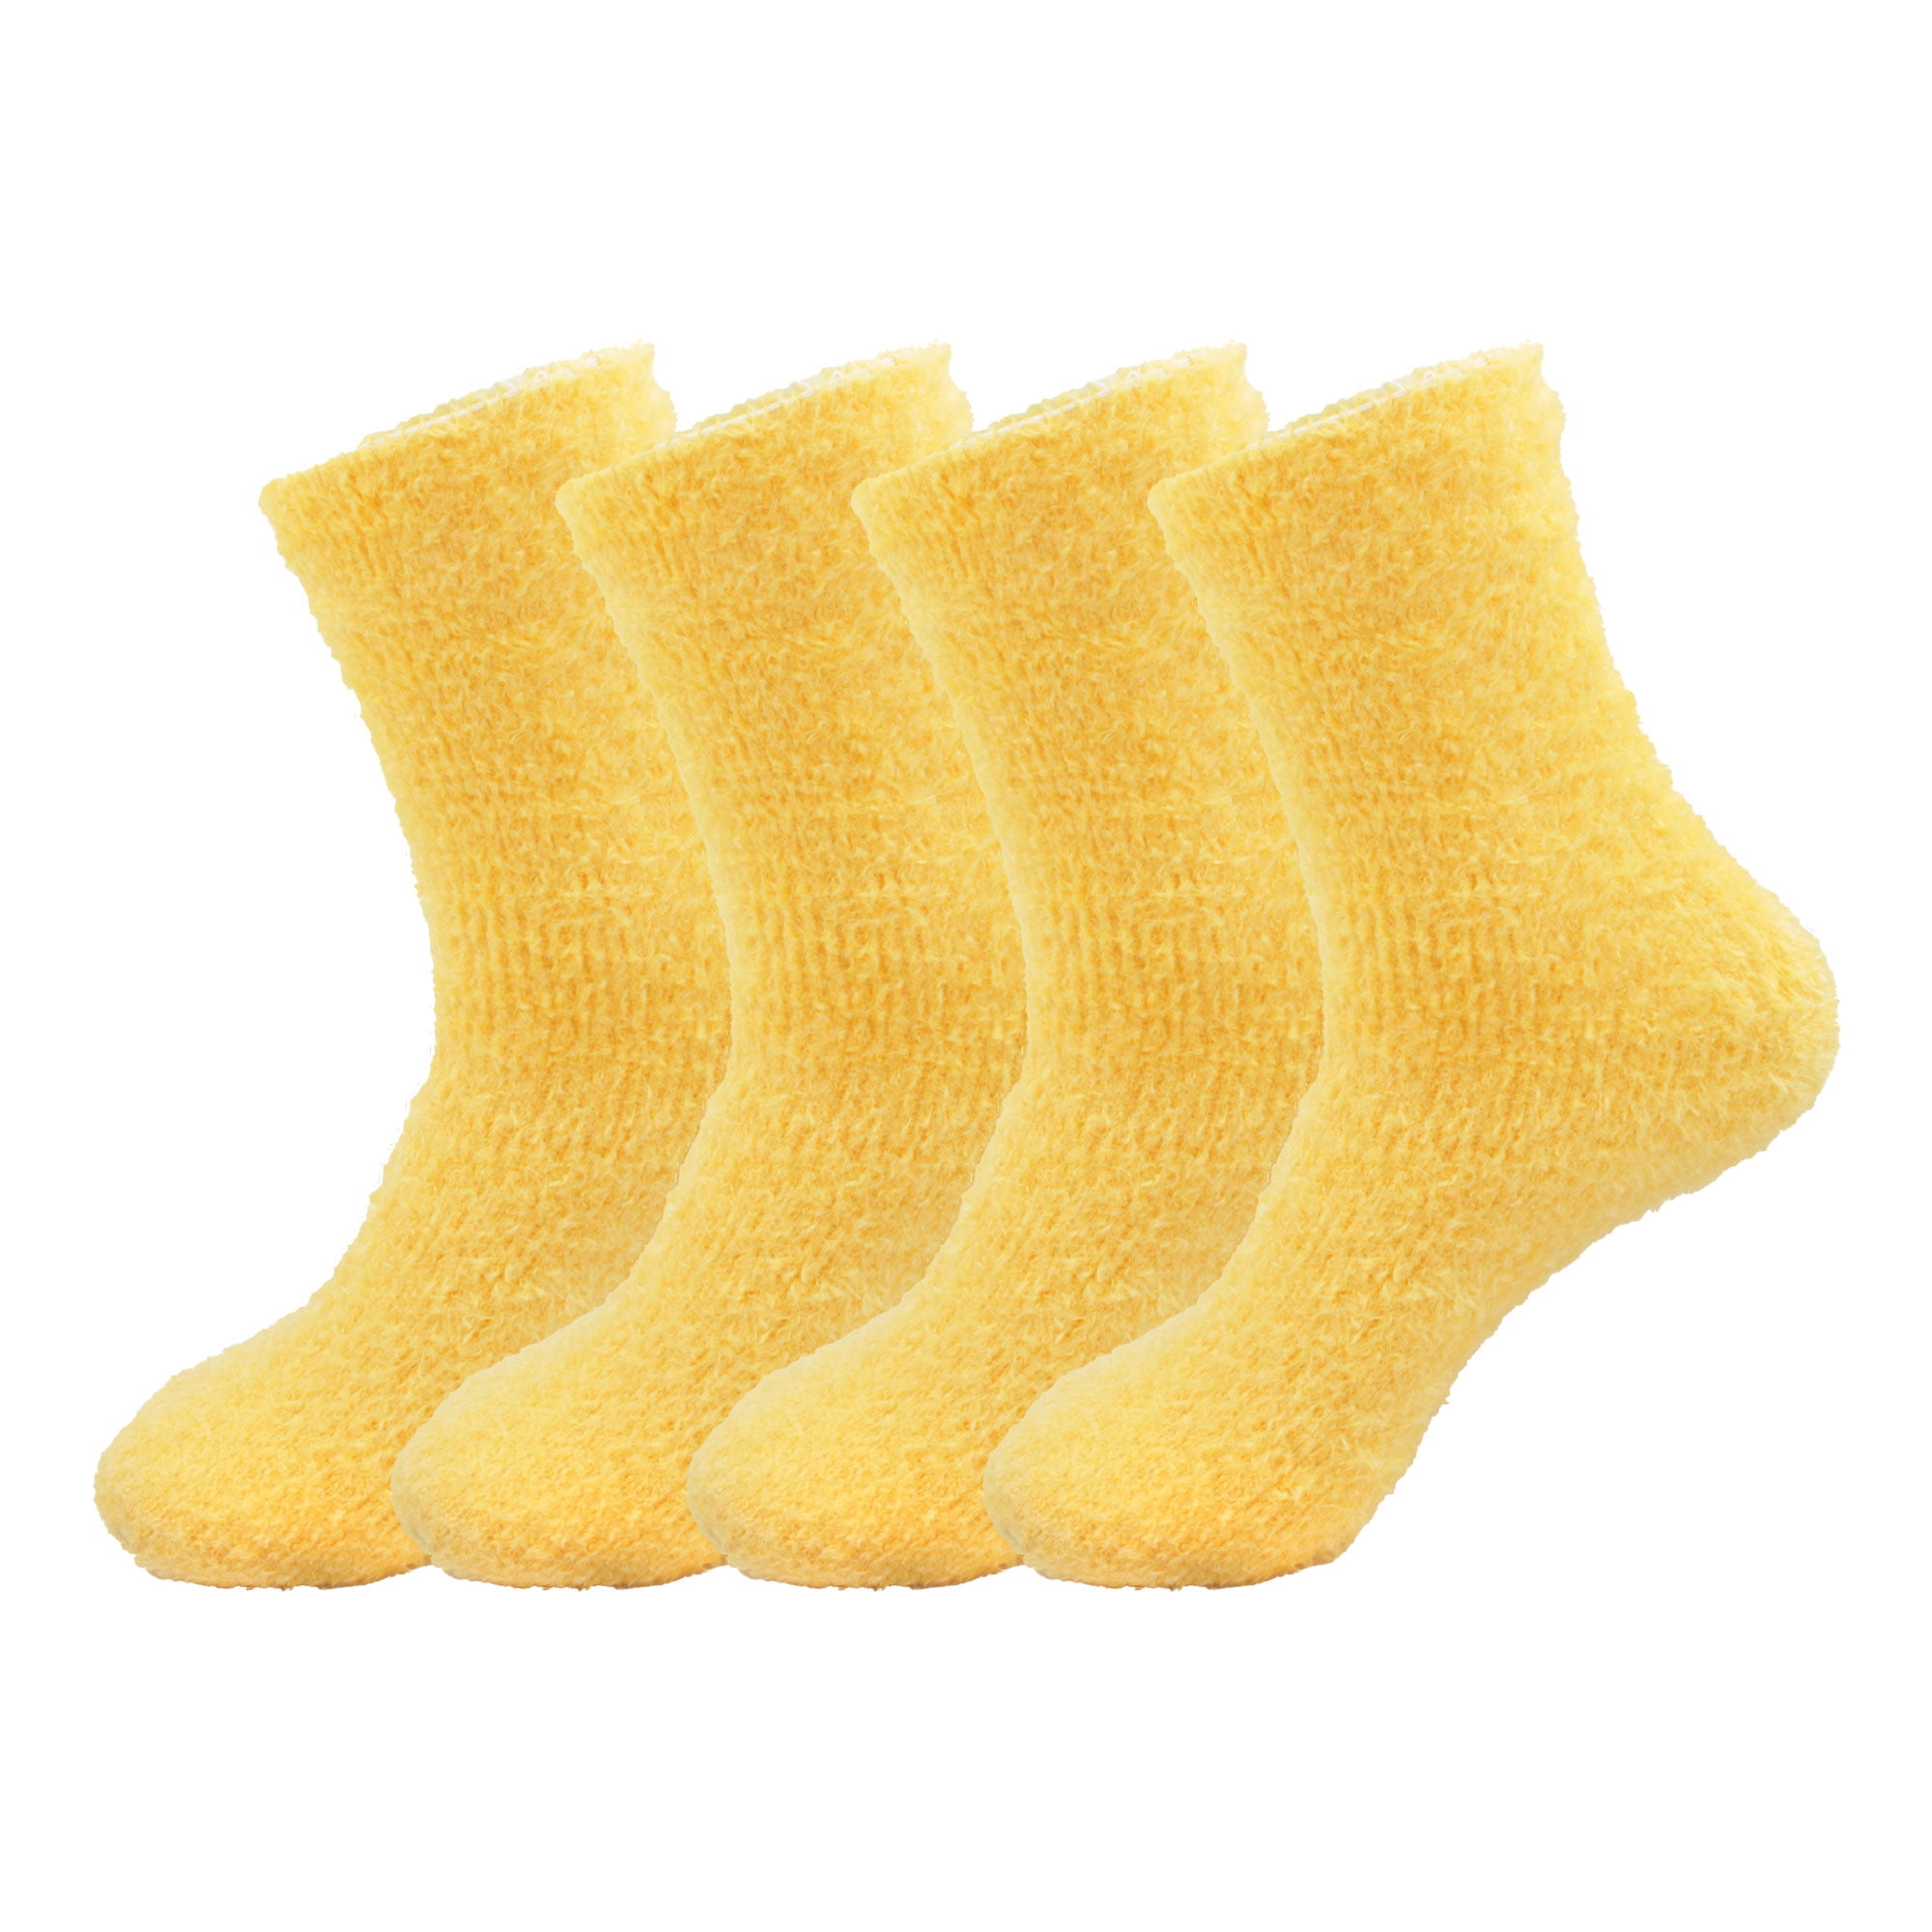 Women's Super Soft and Cozy Feather Light Fuzzy Home Socks - Sunshine  Yellow - 4 Pair Value Pack - Size 10-13